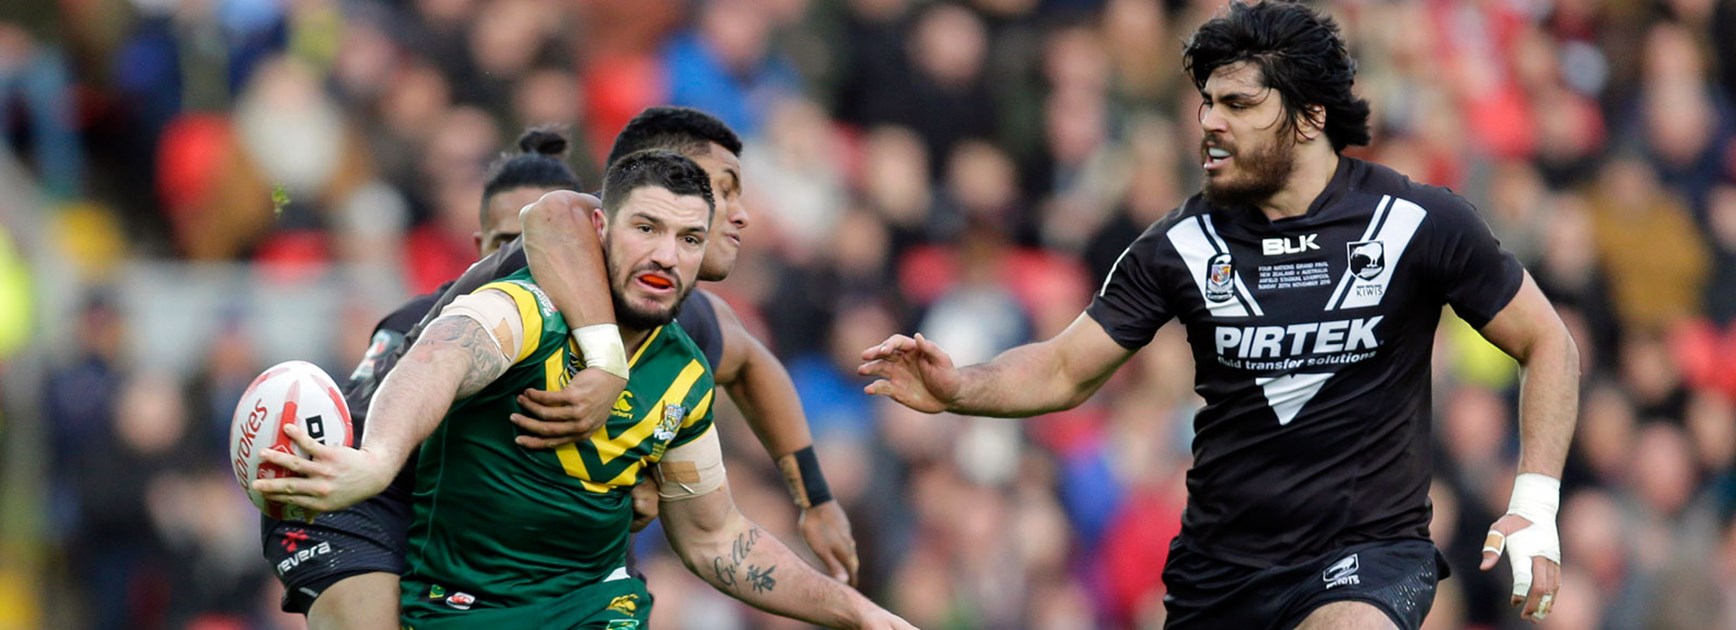 The Kiwis' left-edge defence leaked several tries in the Four Nations final.